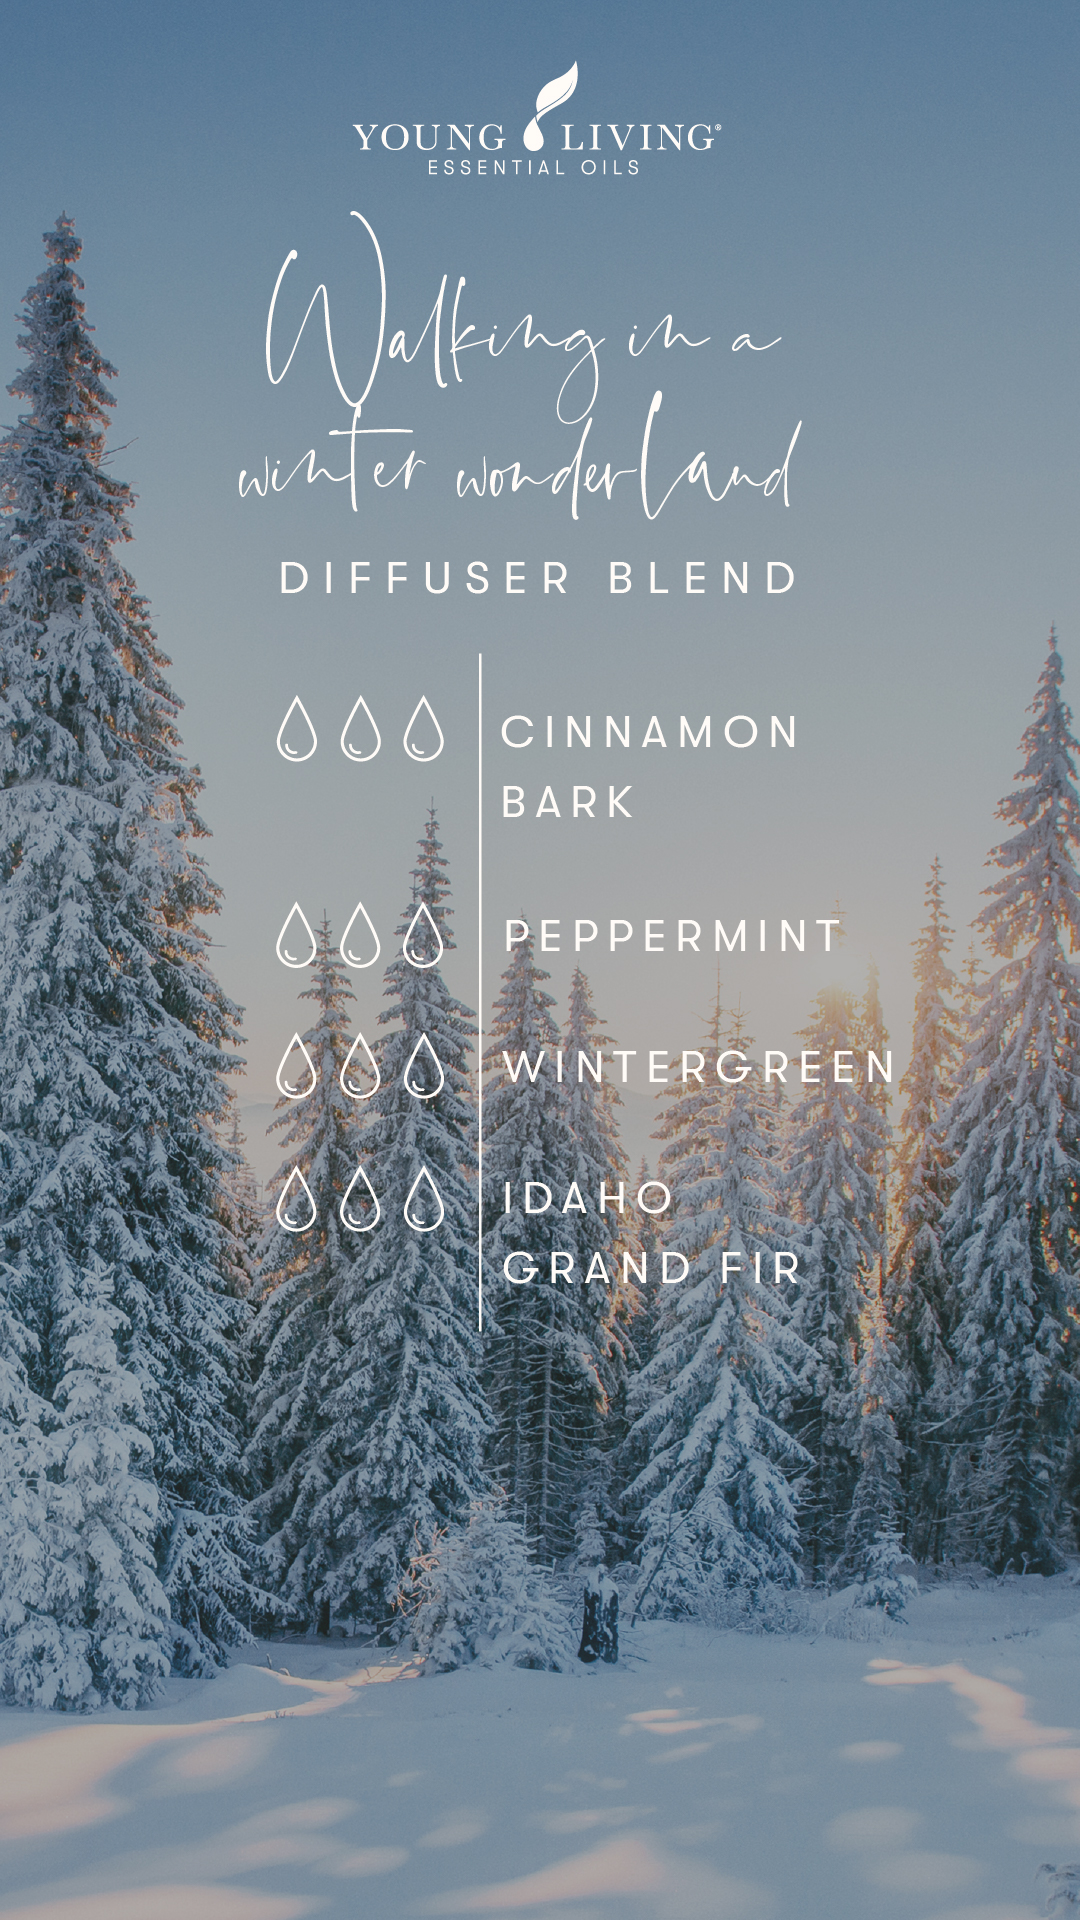 Young Living Essential Oil Blends - Walking in a winter wonderland